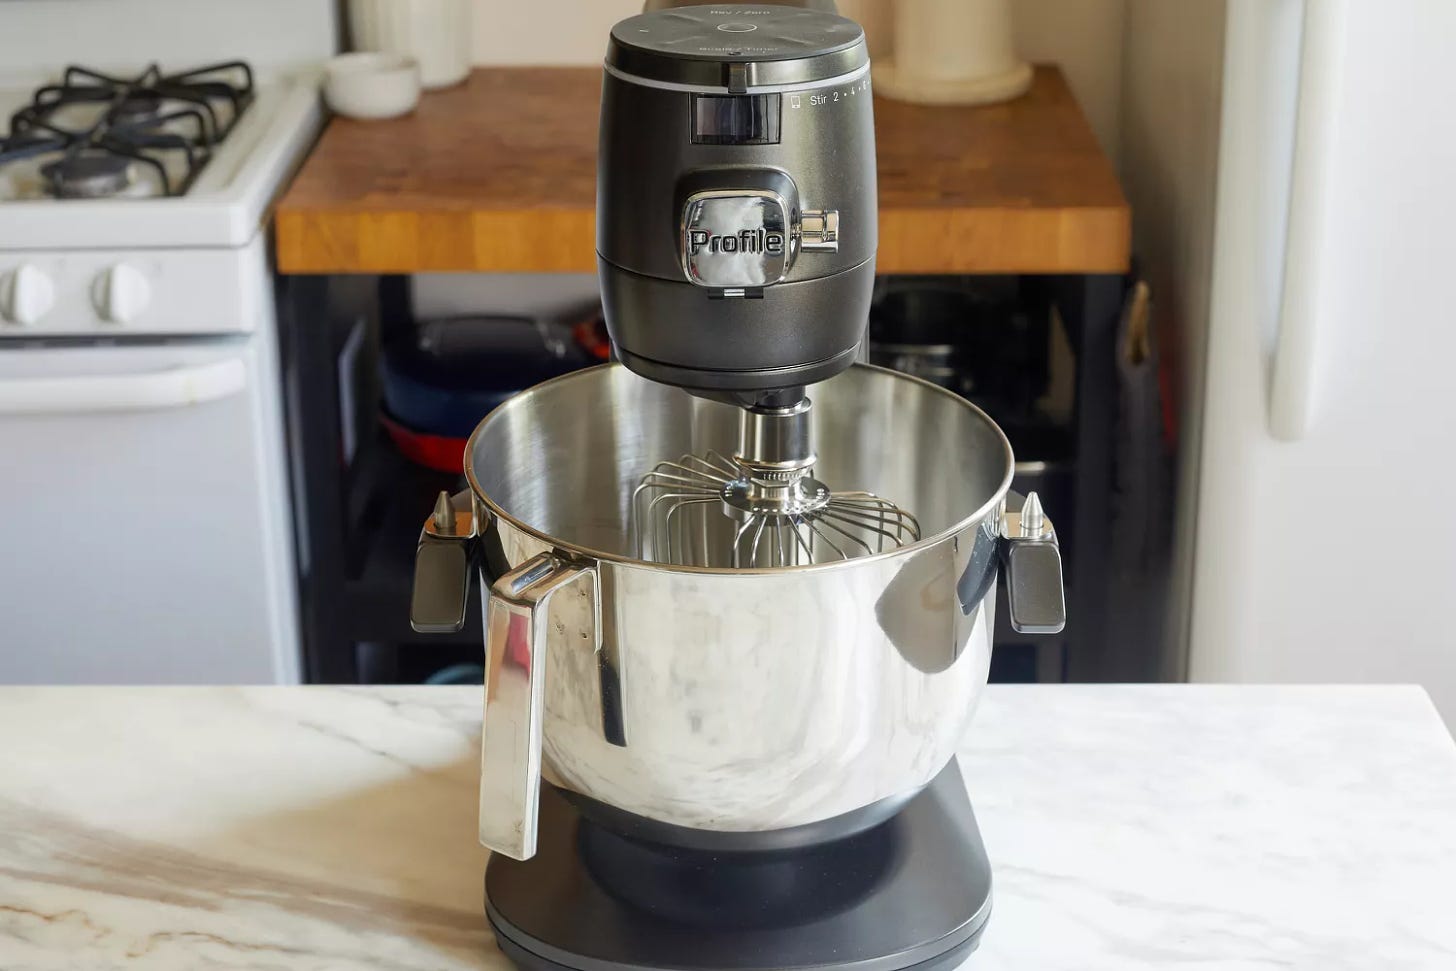 GE Profile Stand Mixer on marble countertop